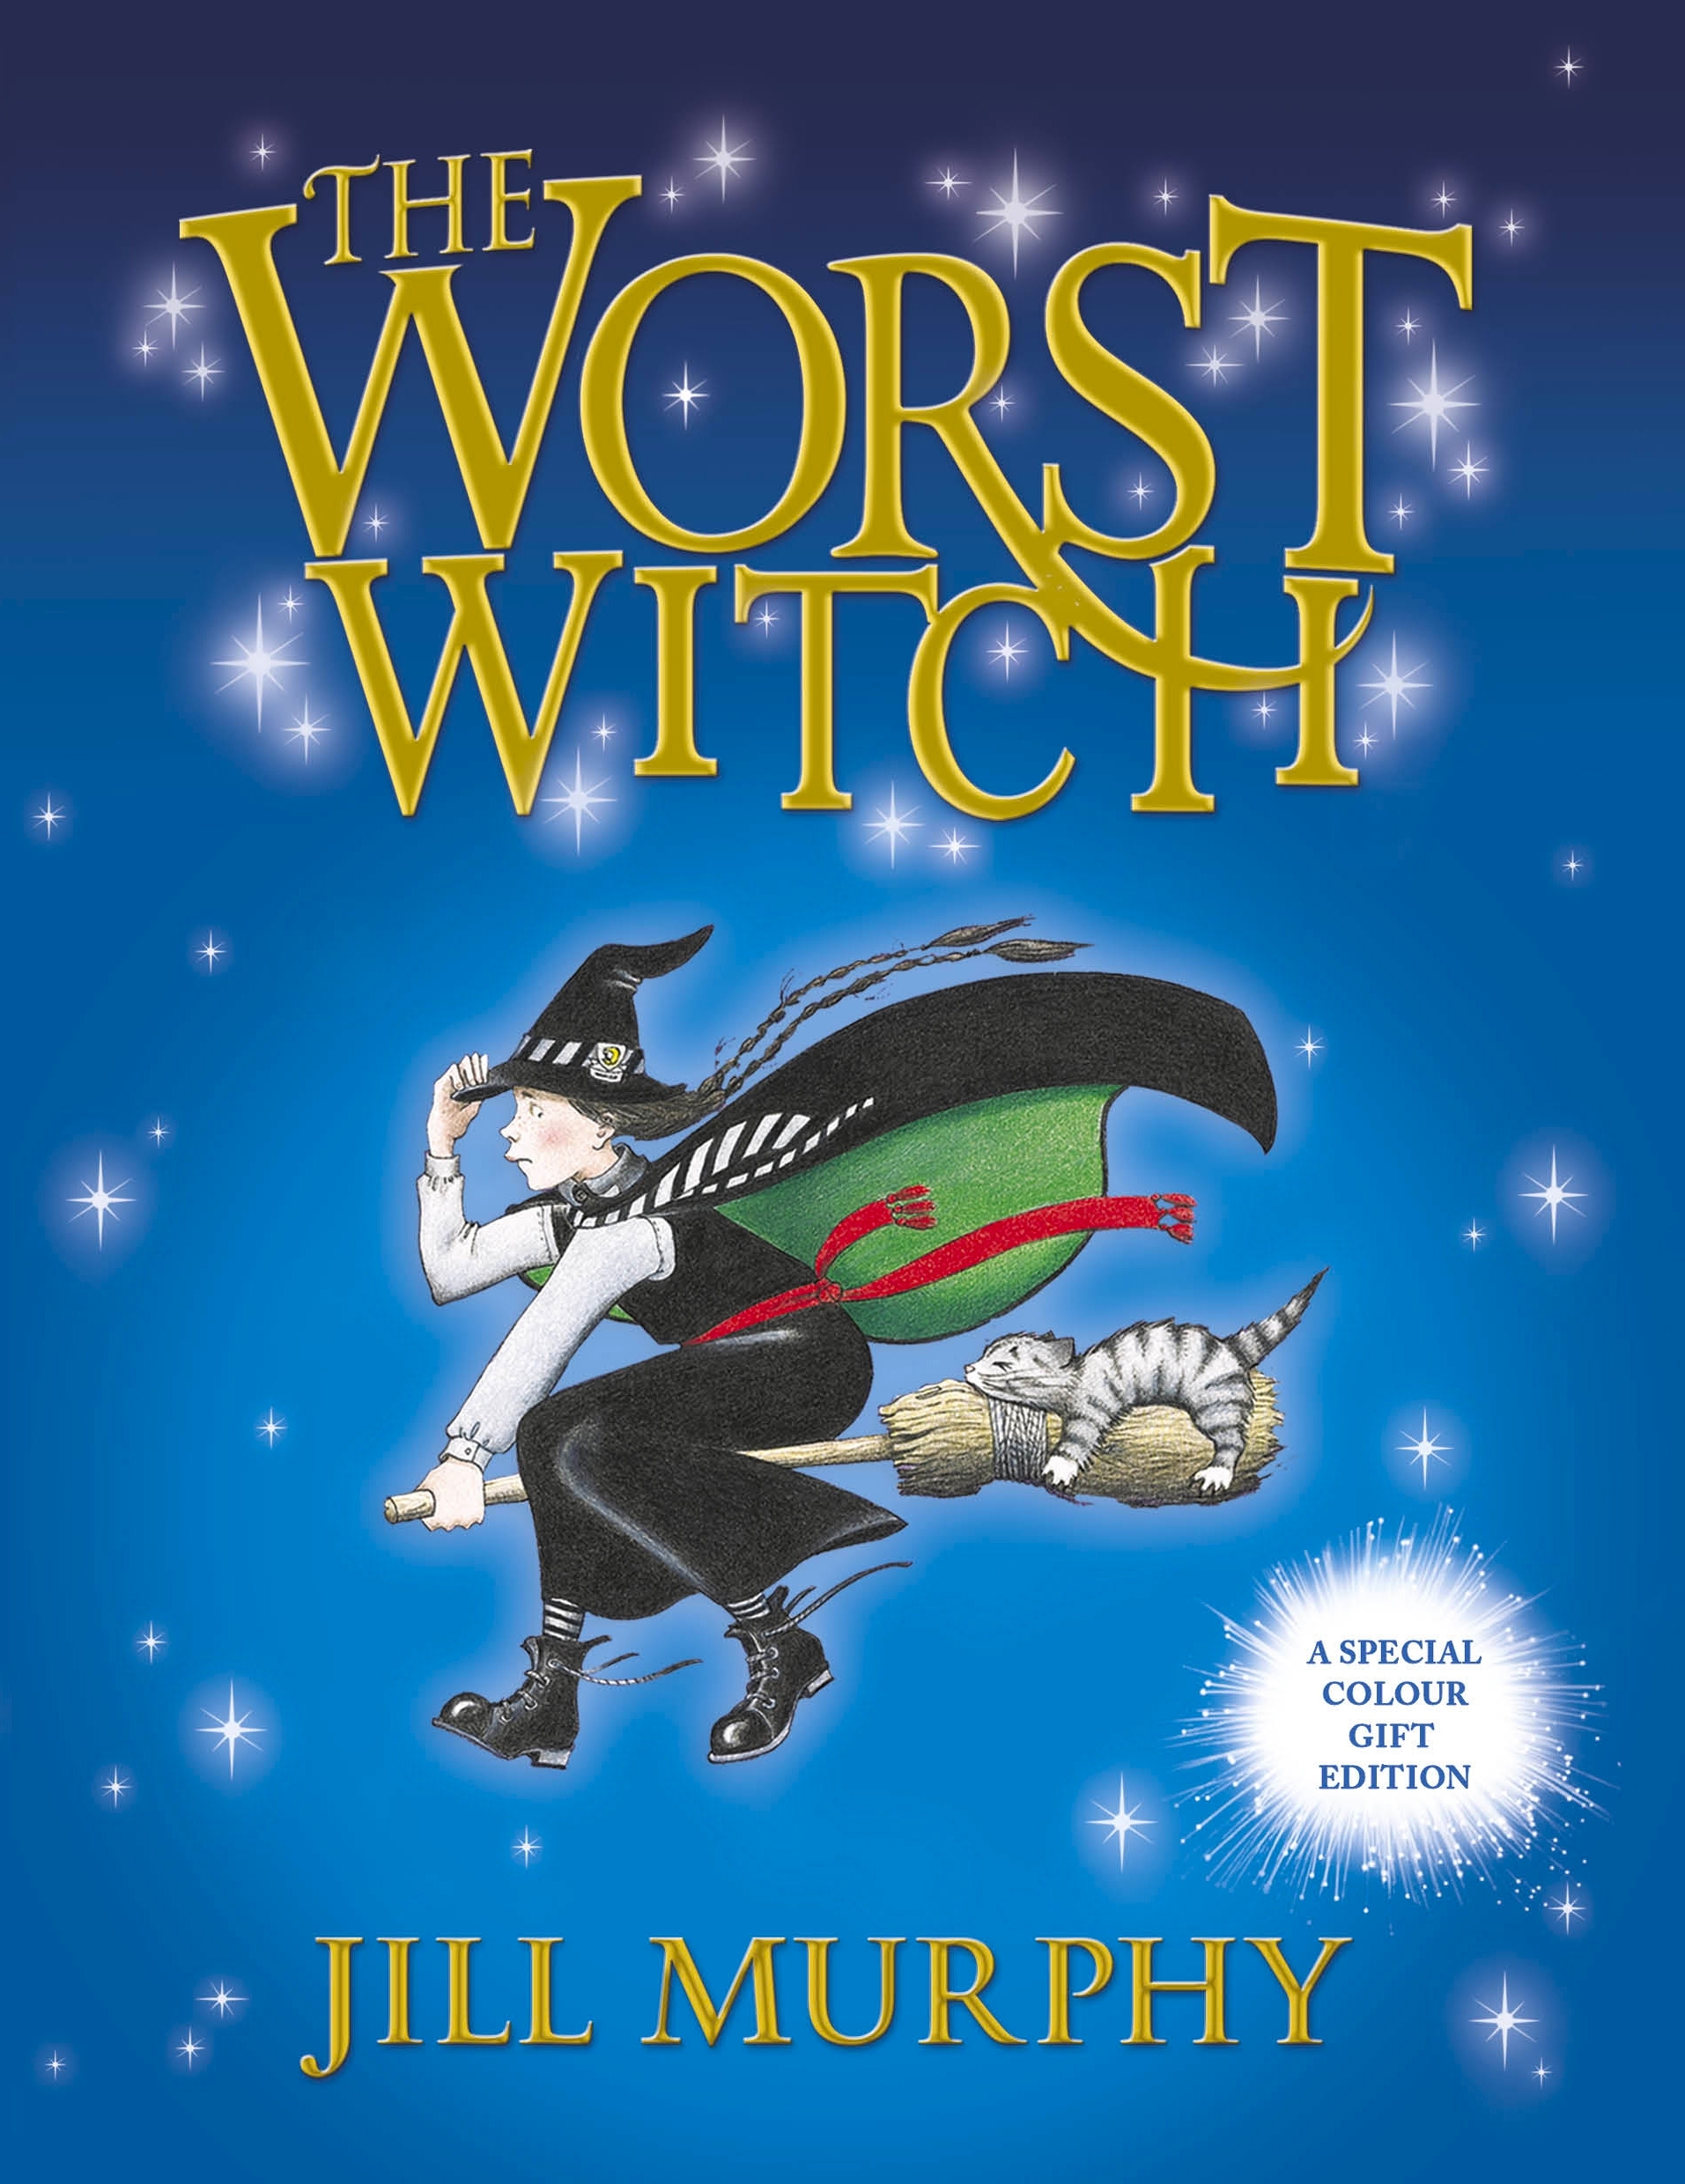 The Worst Witch (Colour Gift Edition) by Jill Murphy - Penguin